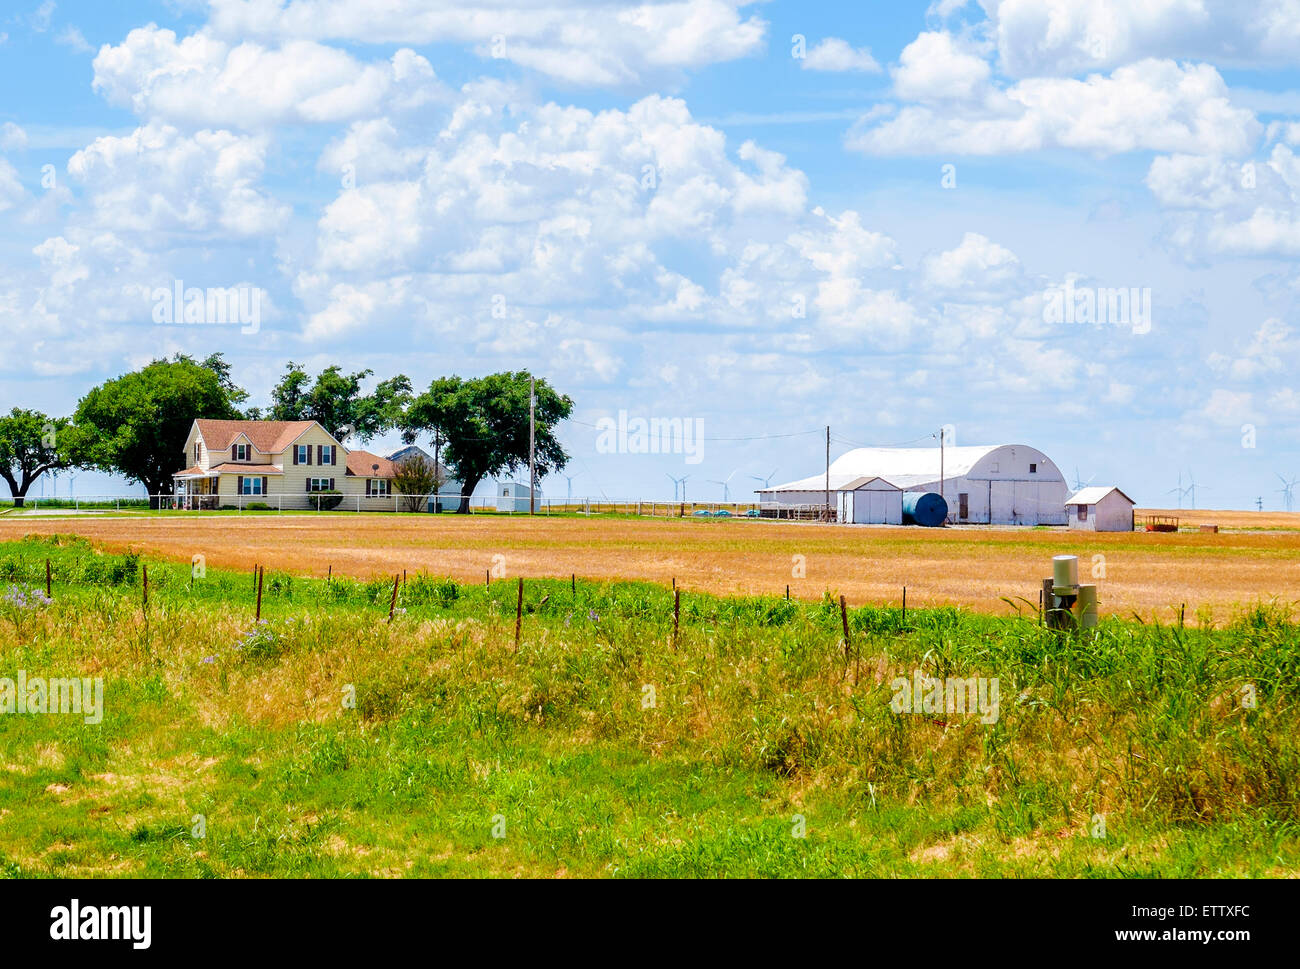 A farm with a two story house and barn, surrounded by a cut wheat field in rural Oklahoma, USA. Stock Photo